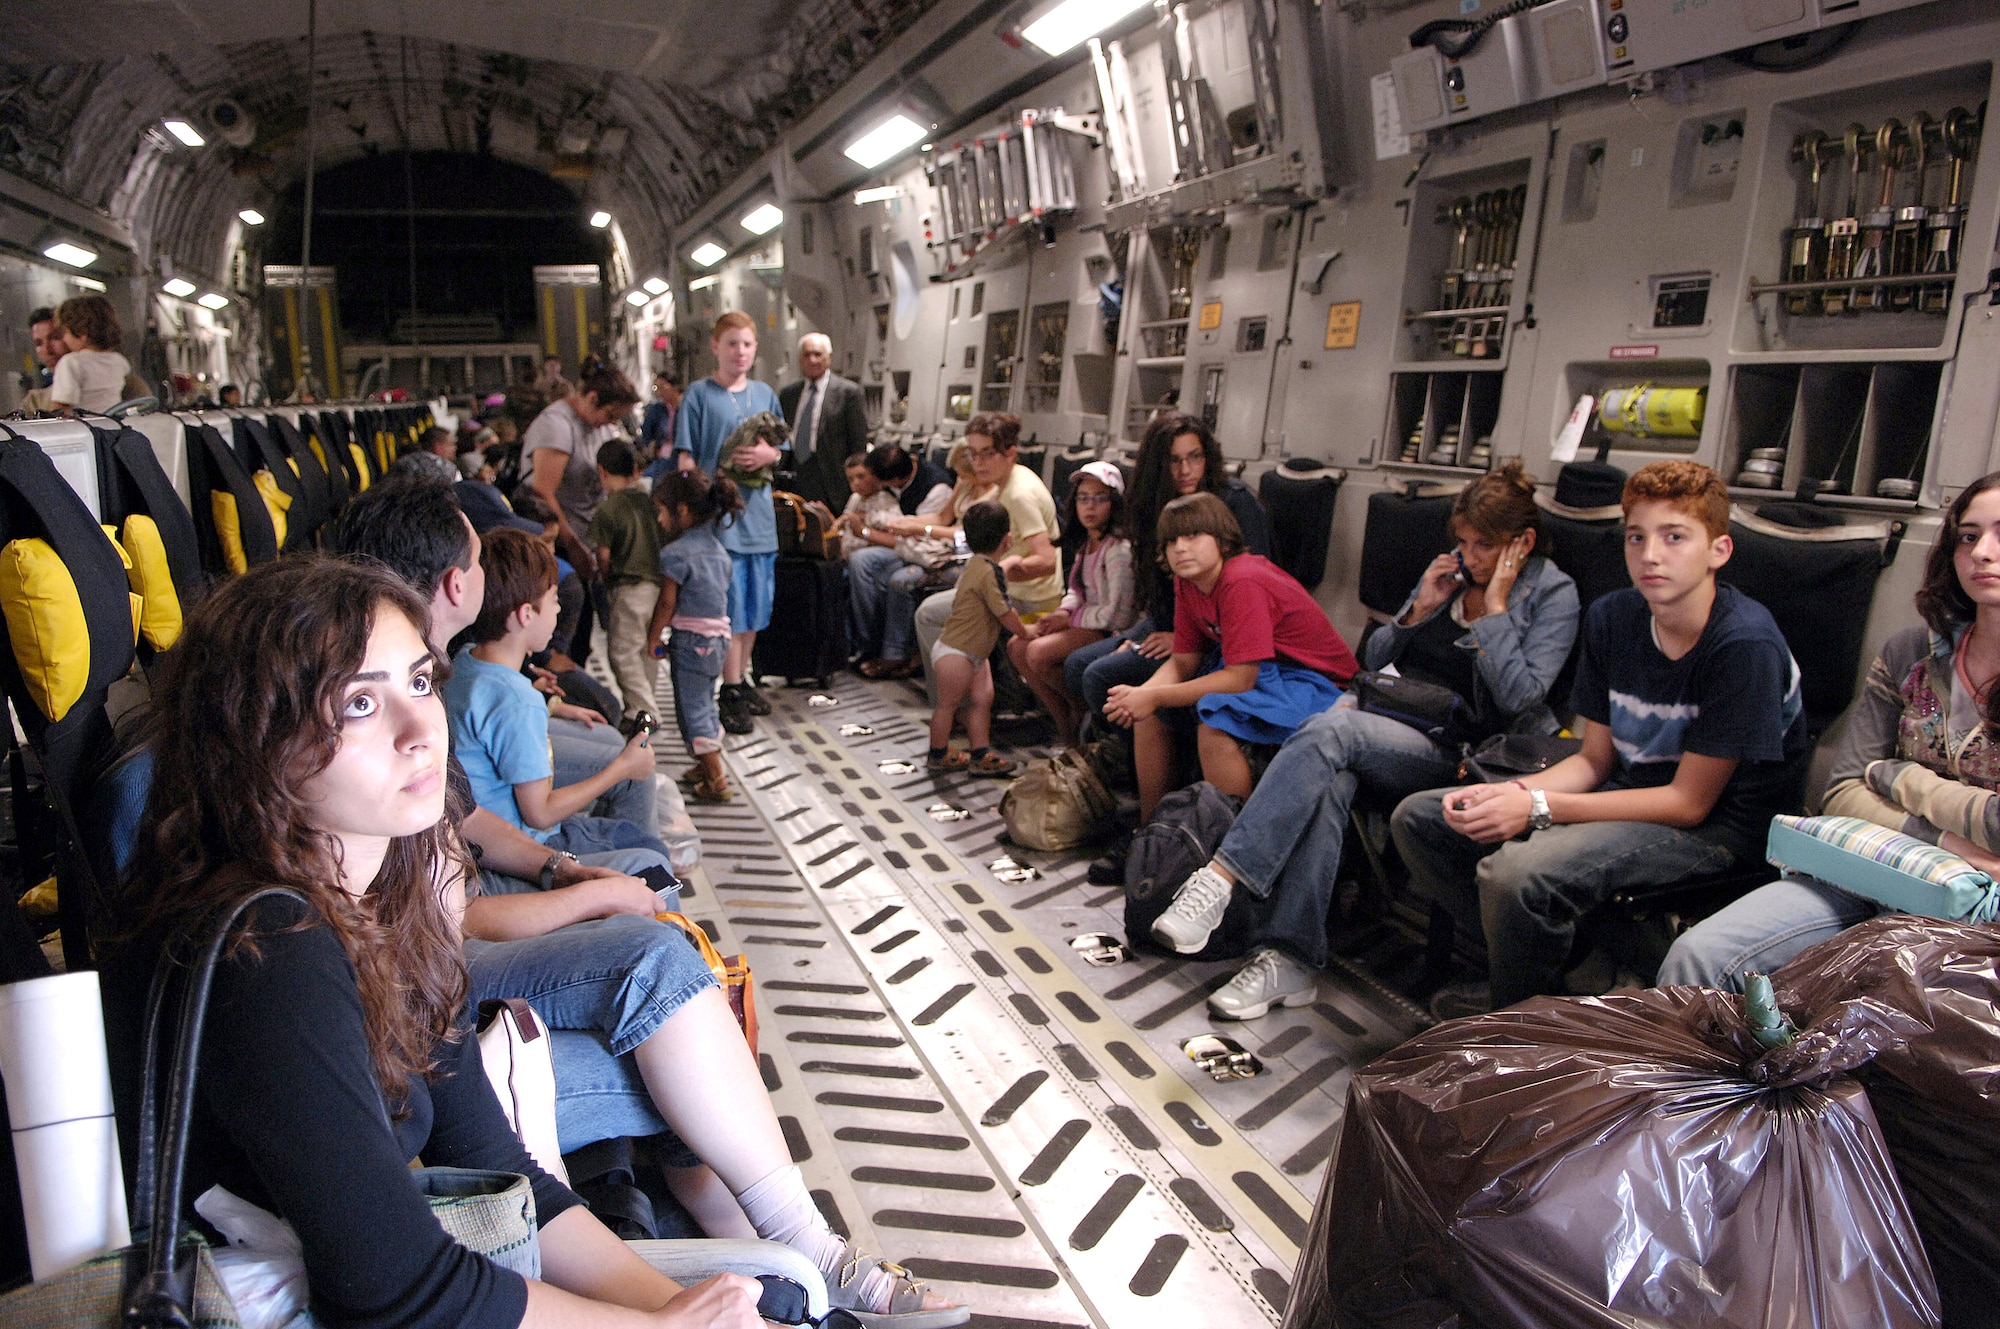 Ninety-five American citizens from Lebanon wait to depart a C-17 Globemaster III, July 24, at McGuire Air Force Base, N.J. PHOENIX RAVEN personnel, along with the FAMS, ensured the safety of the evacuees and the crew during such missions.  (U.S. Air Force photo)